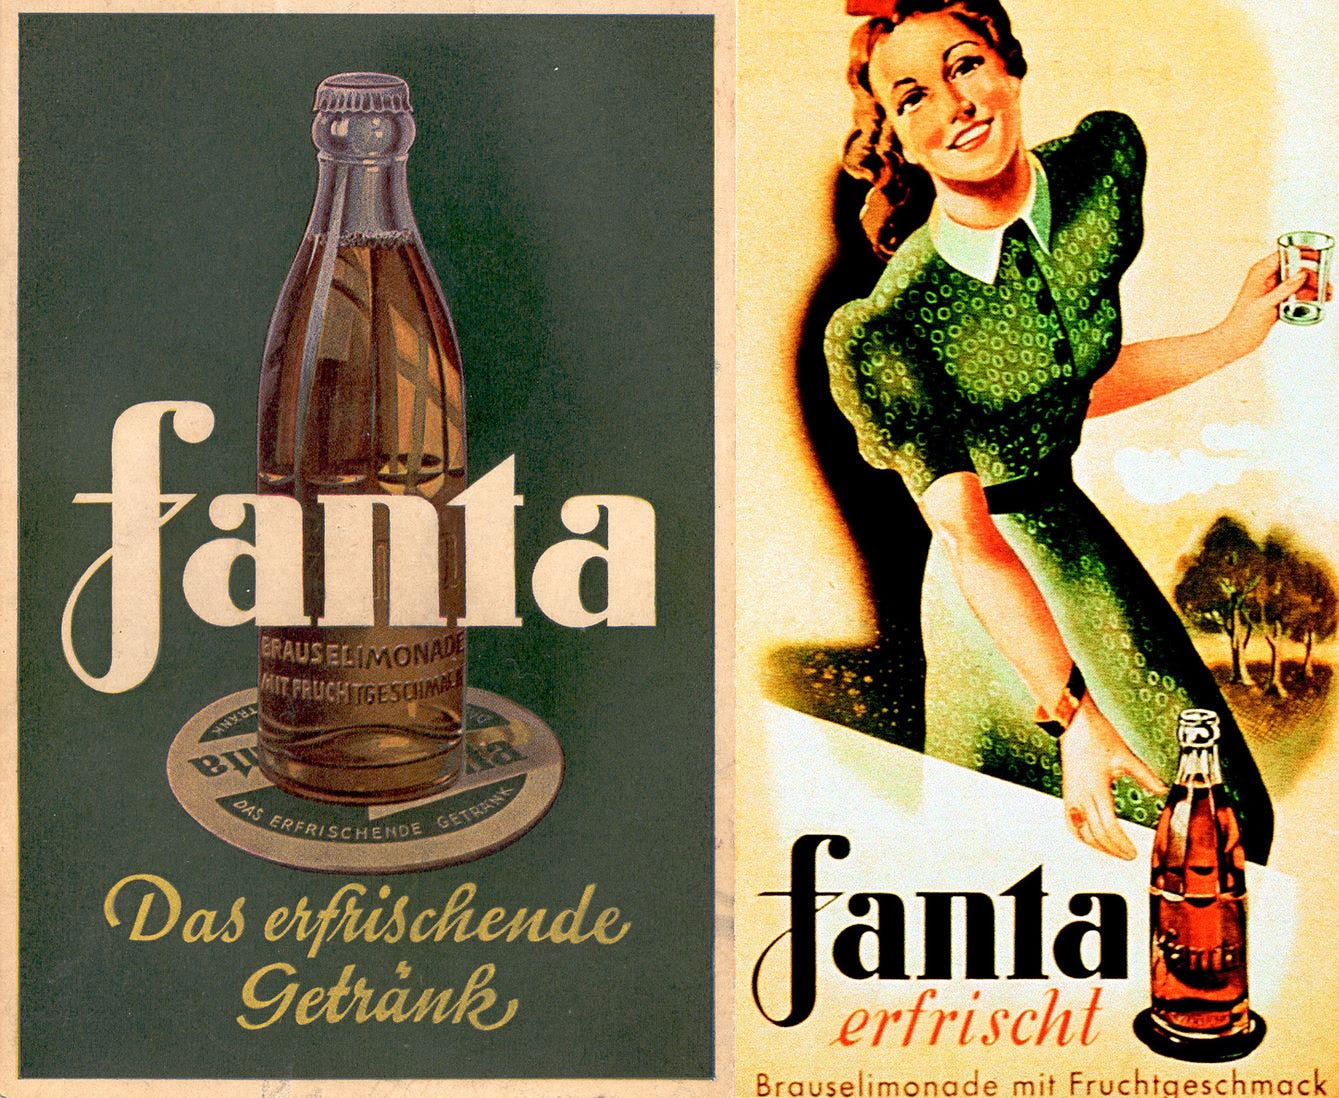 Coca-Cola collaborated with the Nazis in the 1930s, and Fanta is the proof by New Visions Timeline